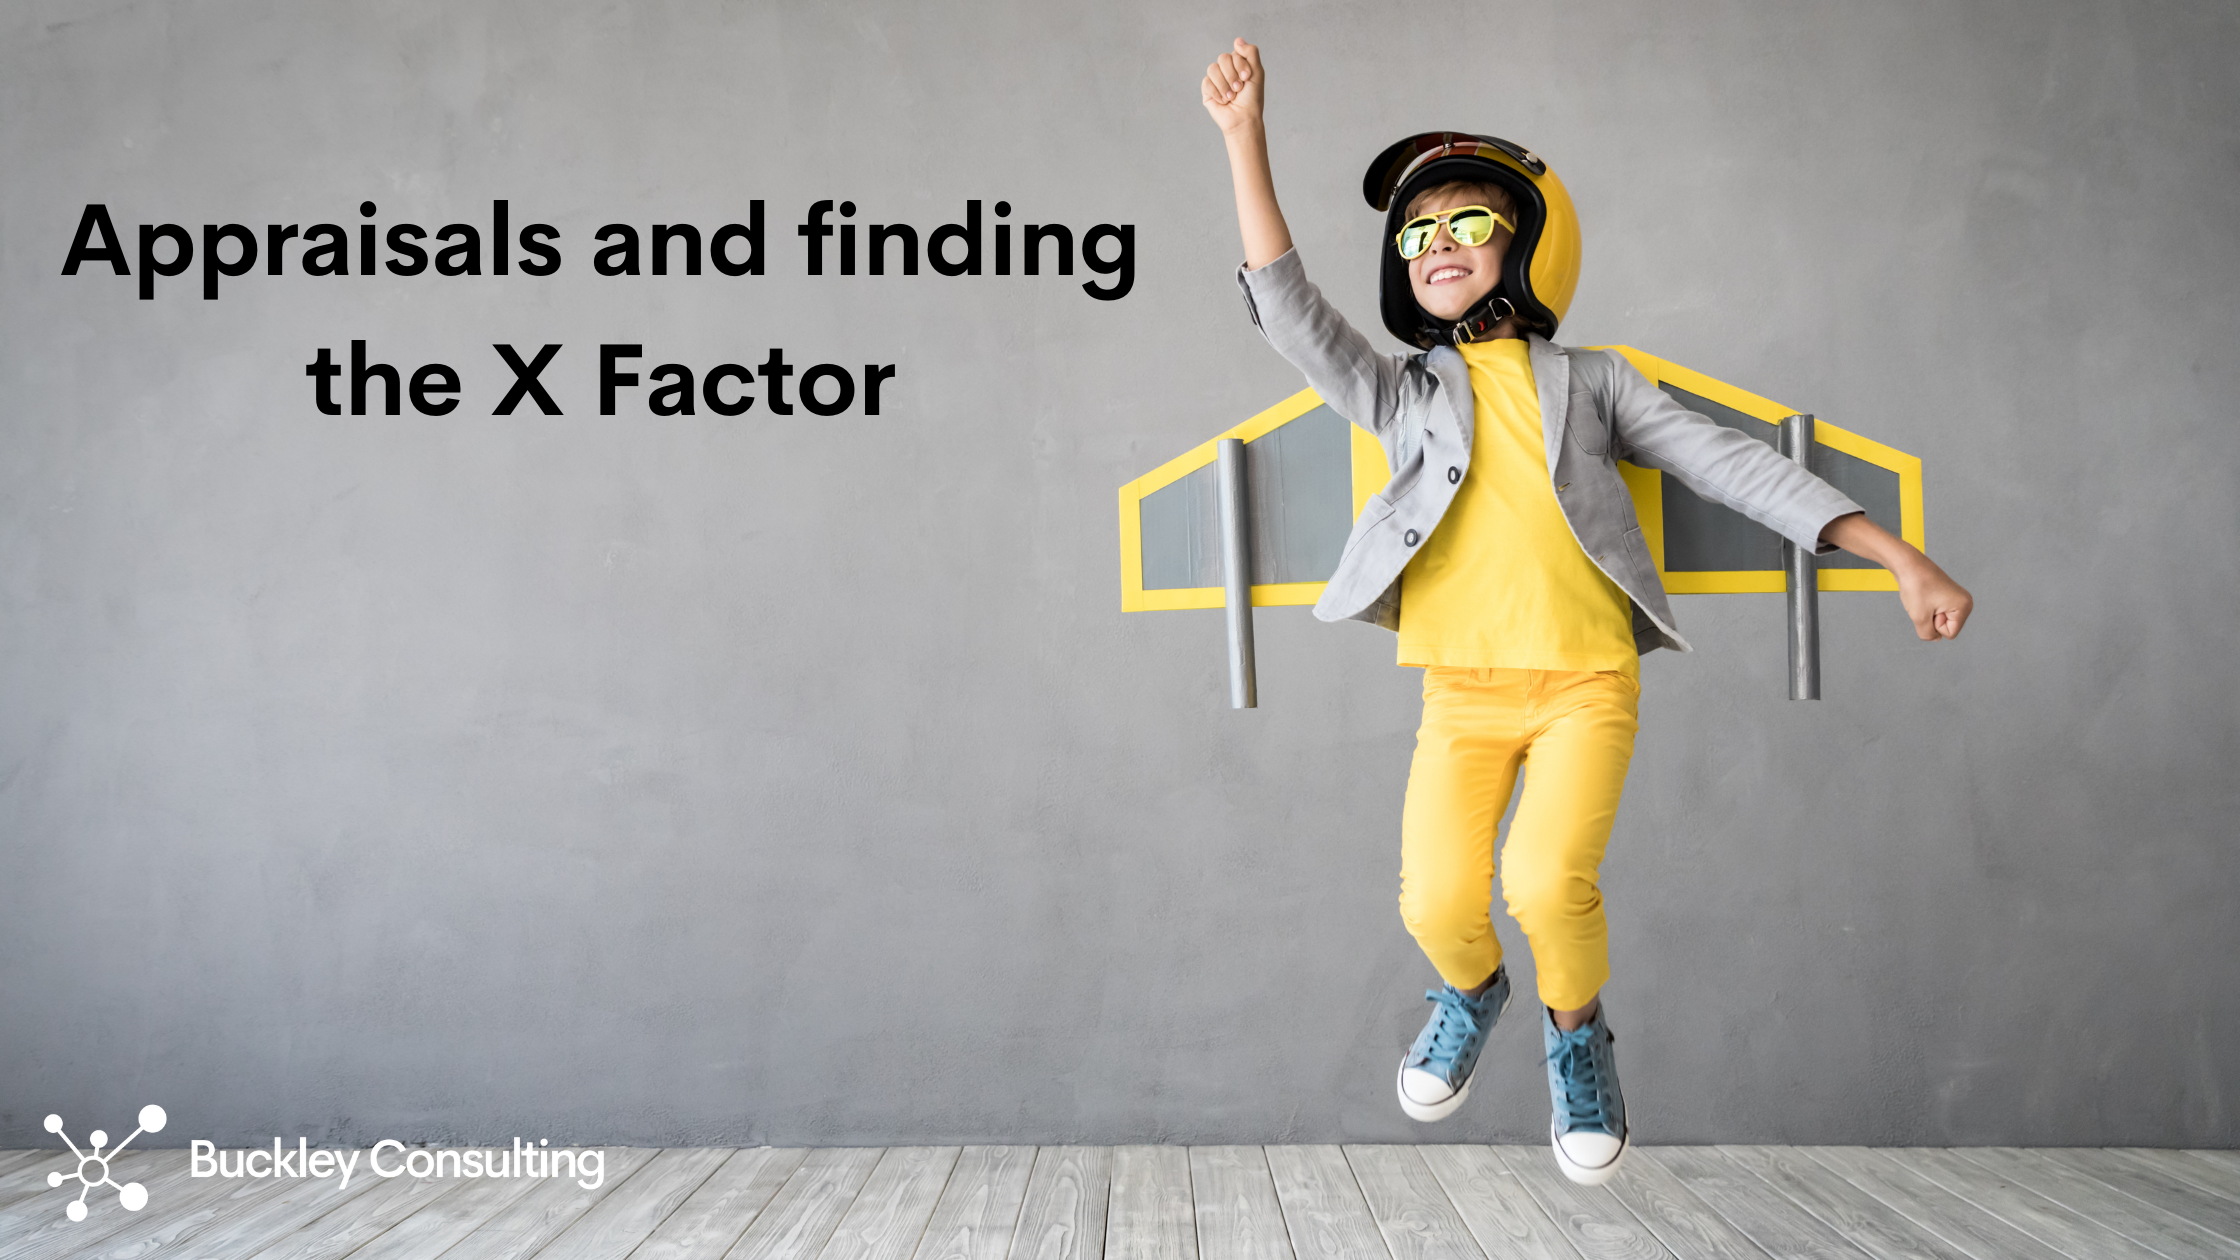 Appraisals and finding the X Factor